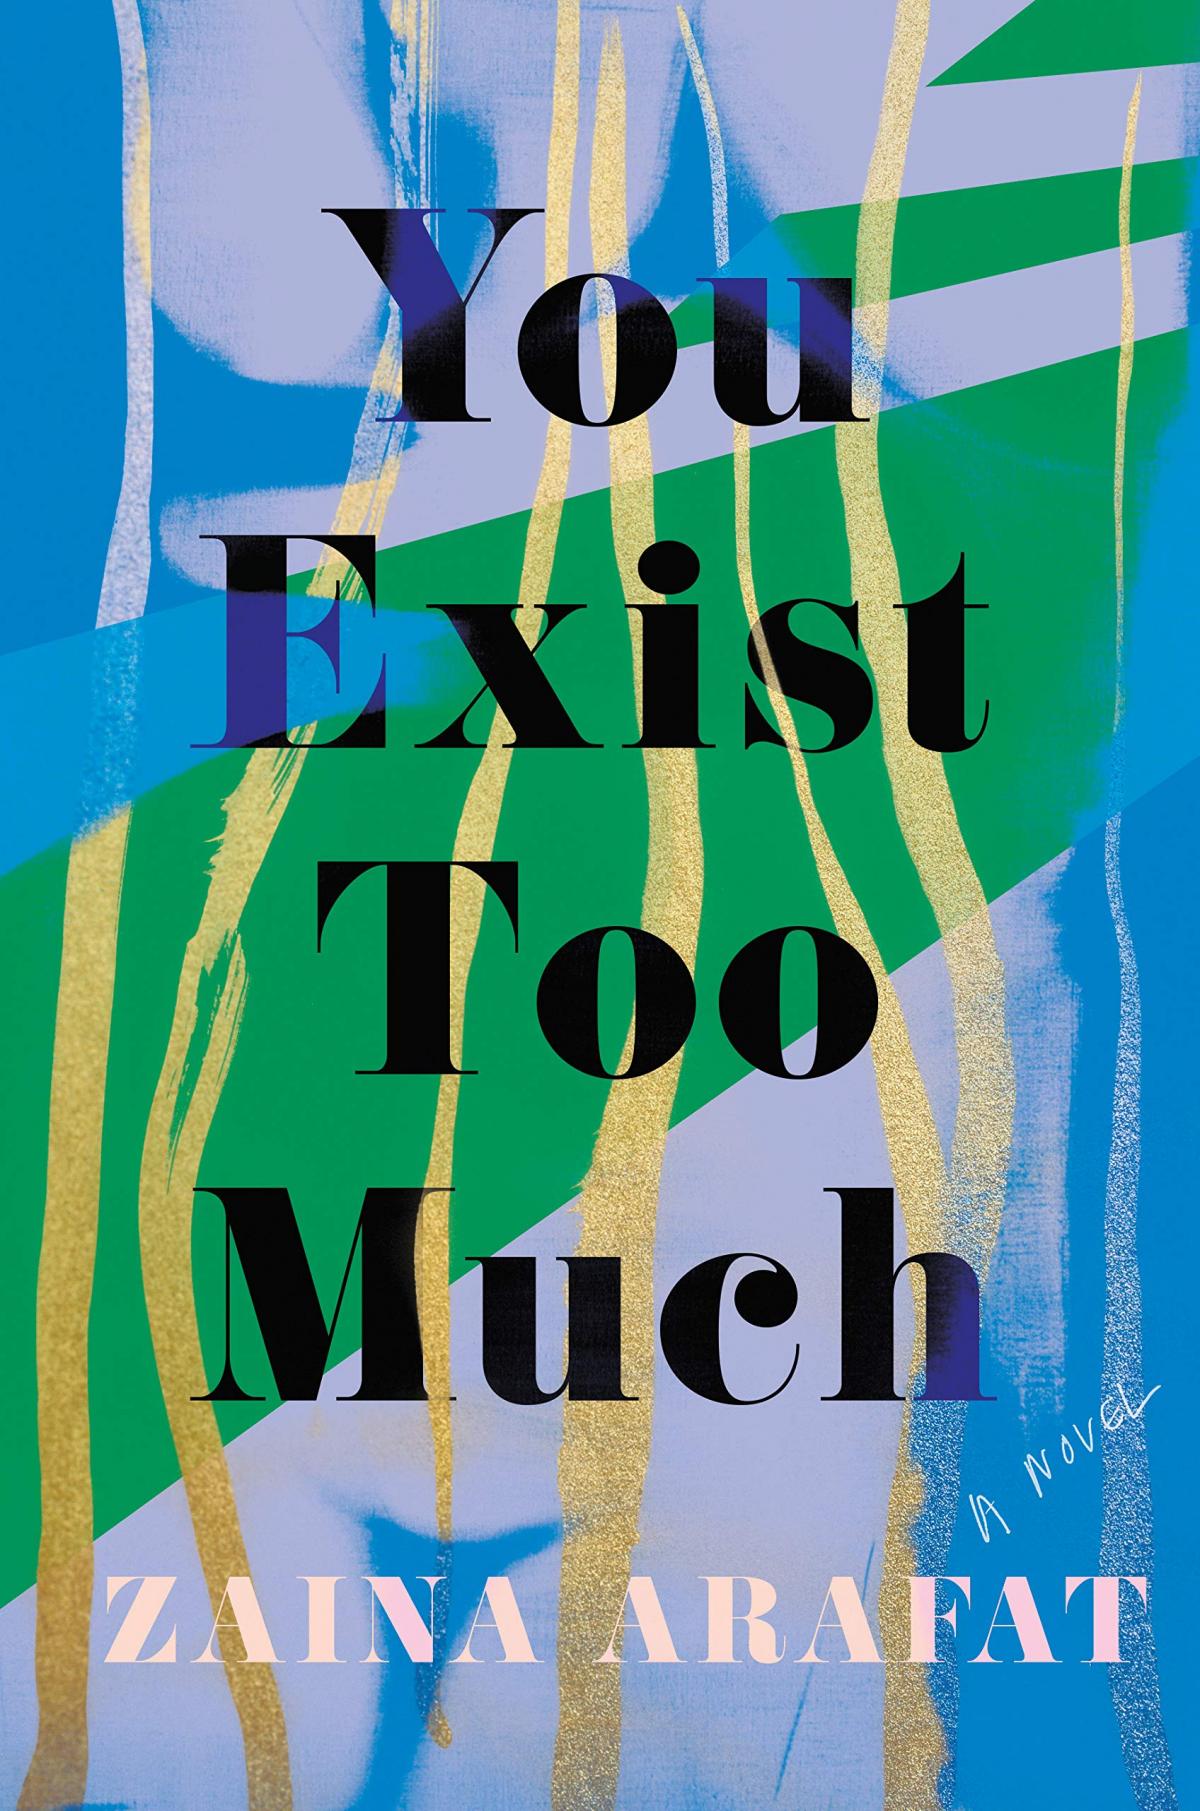 Book cover for "You Exist Too Much" by Zaina Arafat